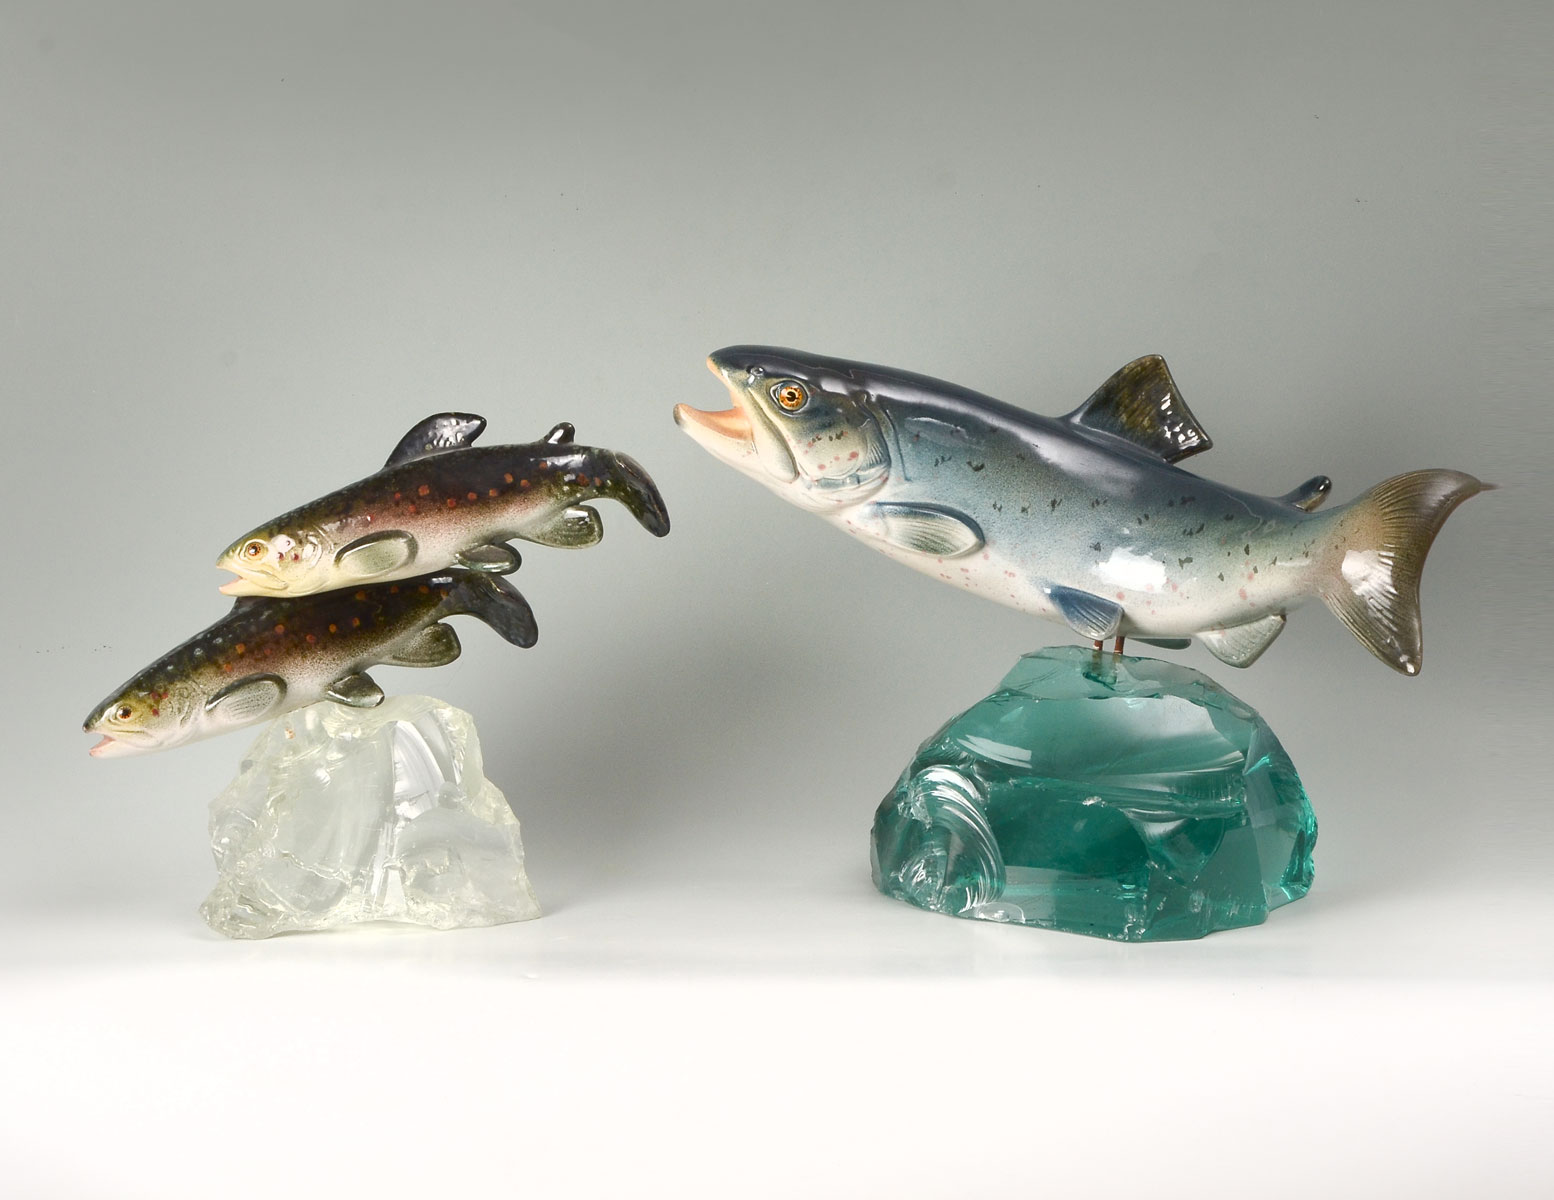 2 FRENCH PORCELAIN FISH ON GLASS